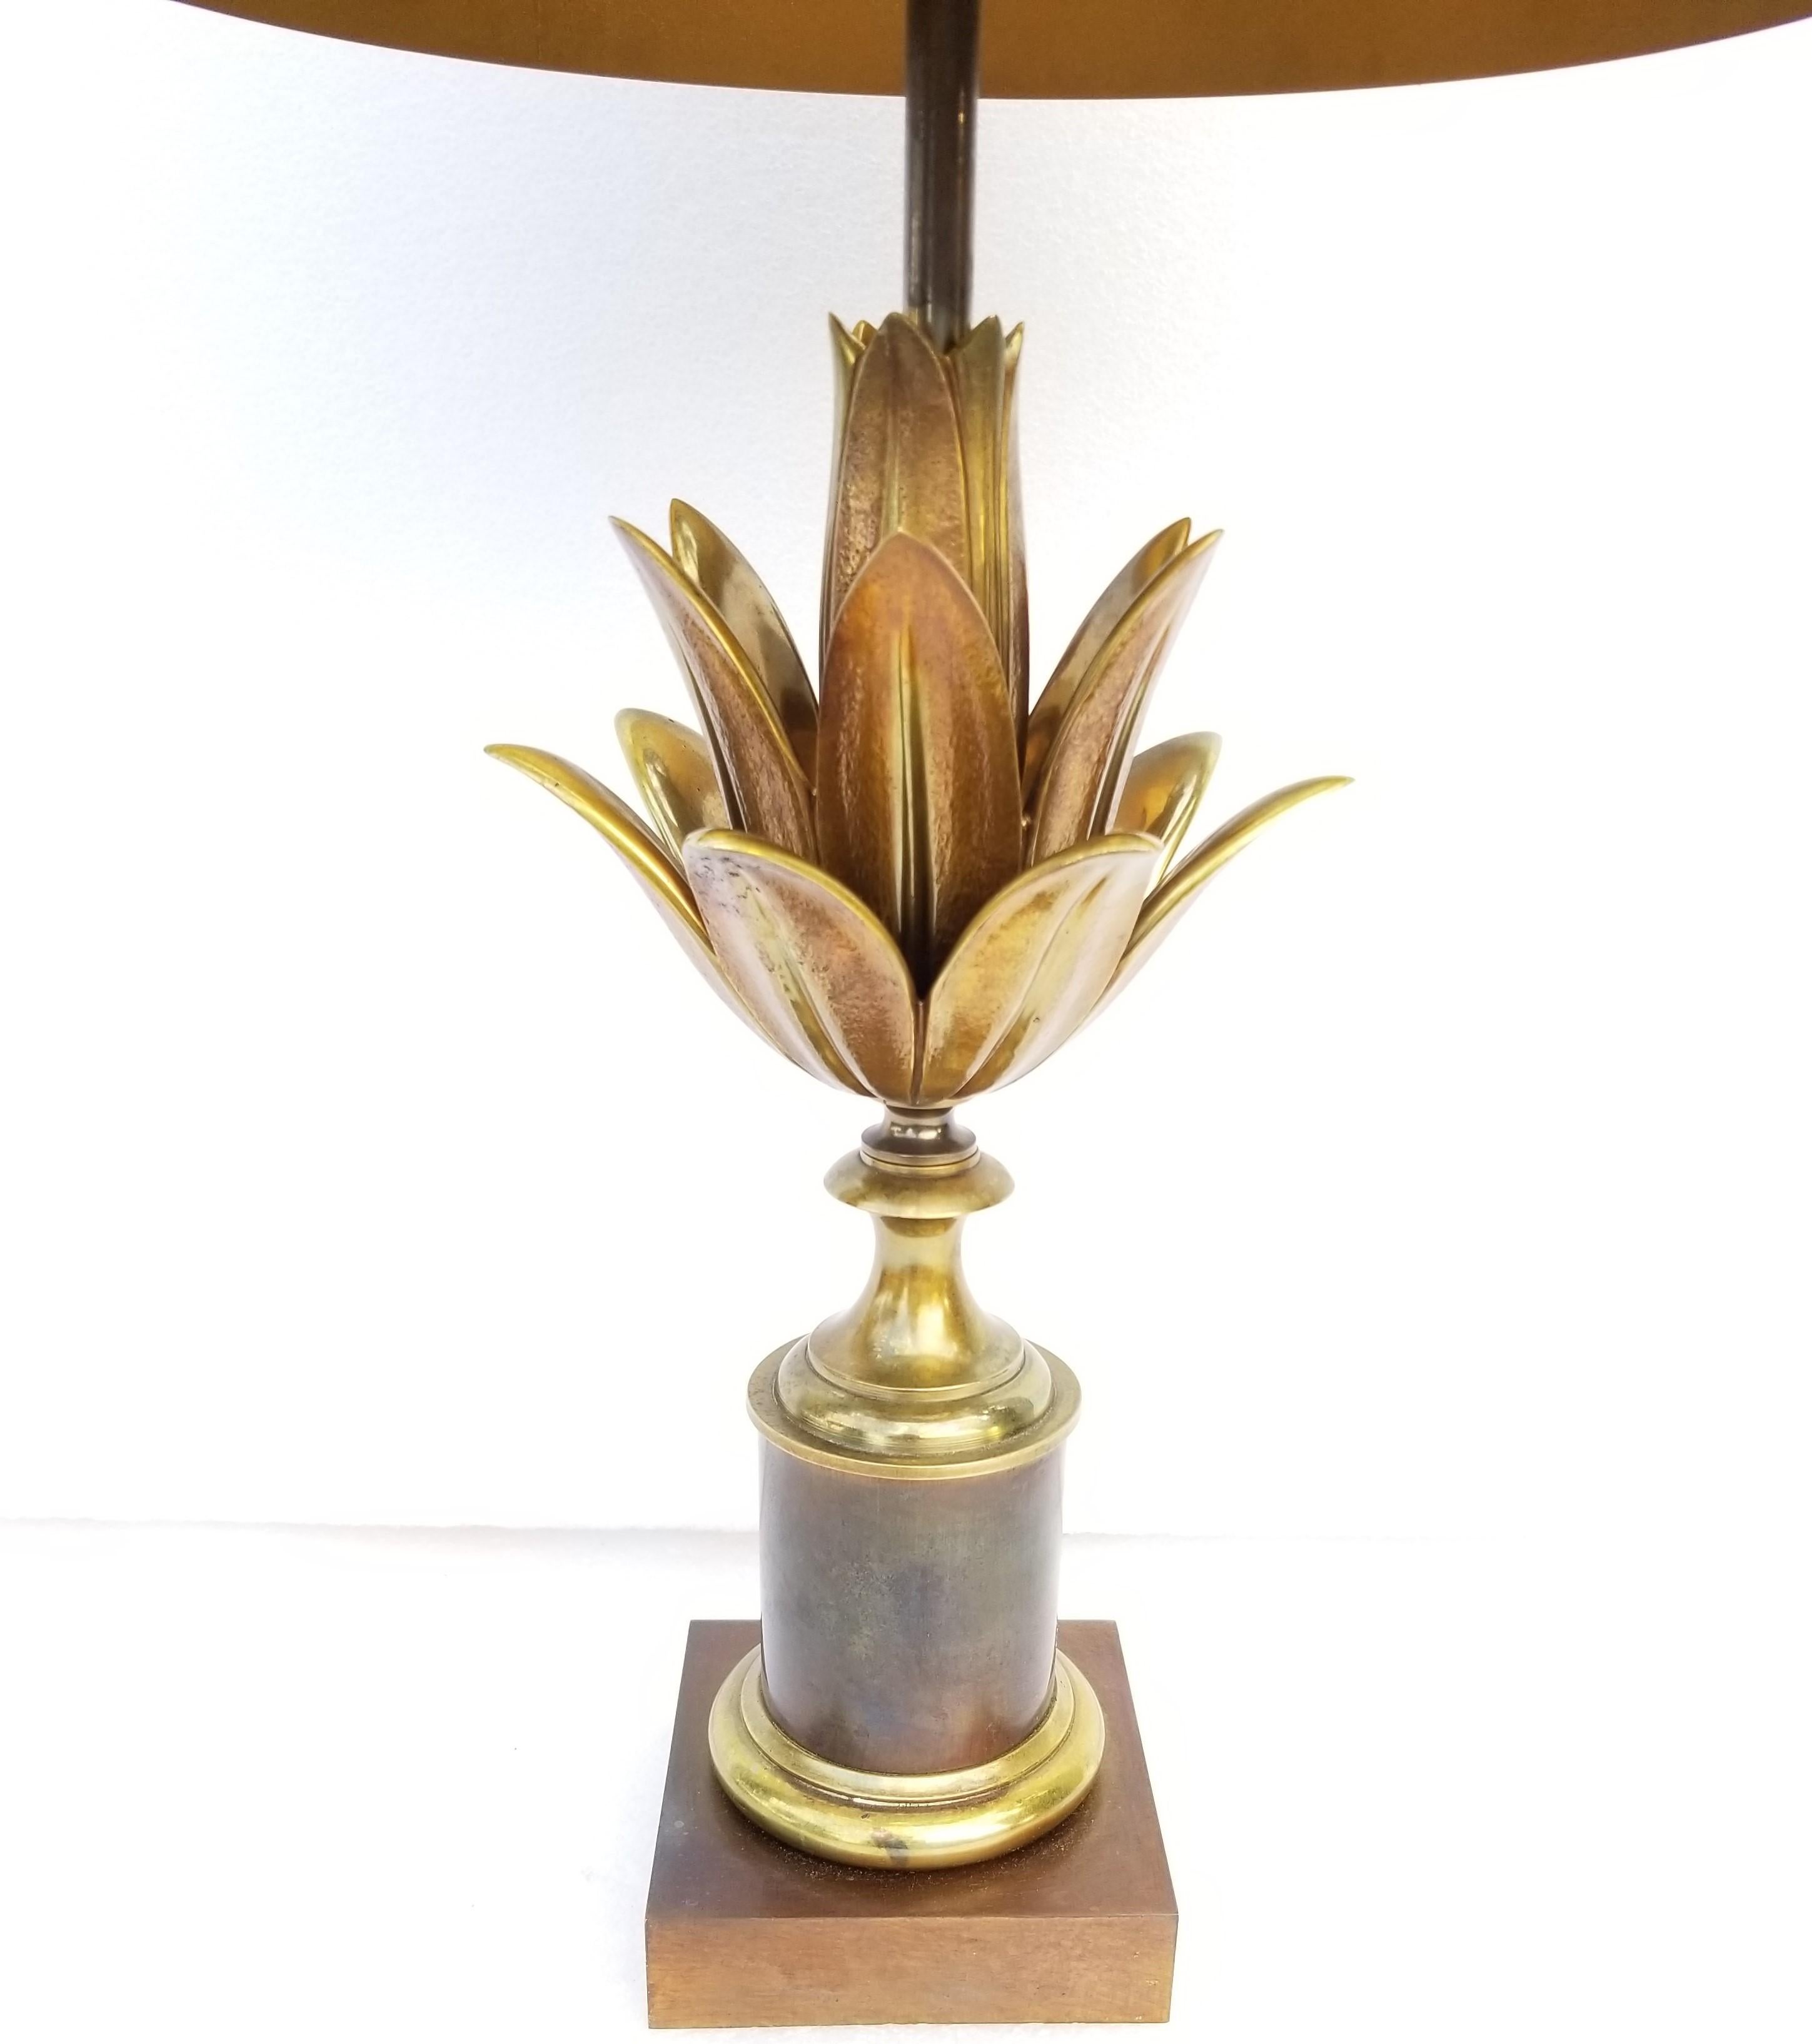 Neoclassical Maison Charles Bronze Table Lamp